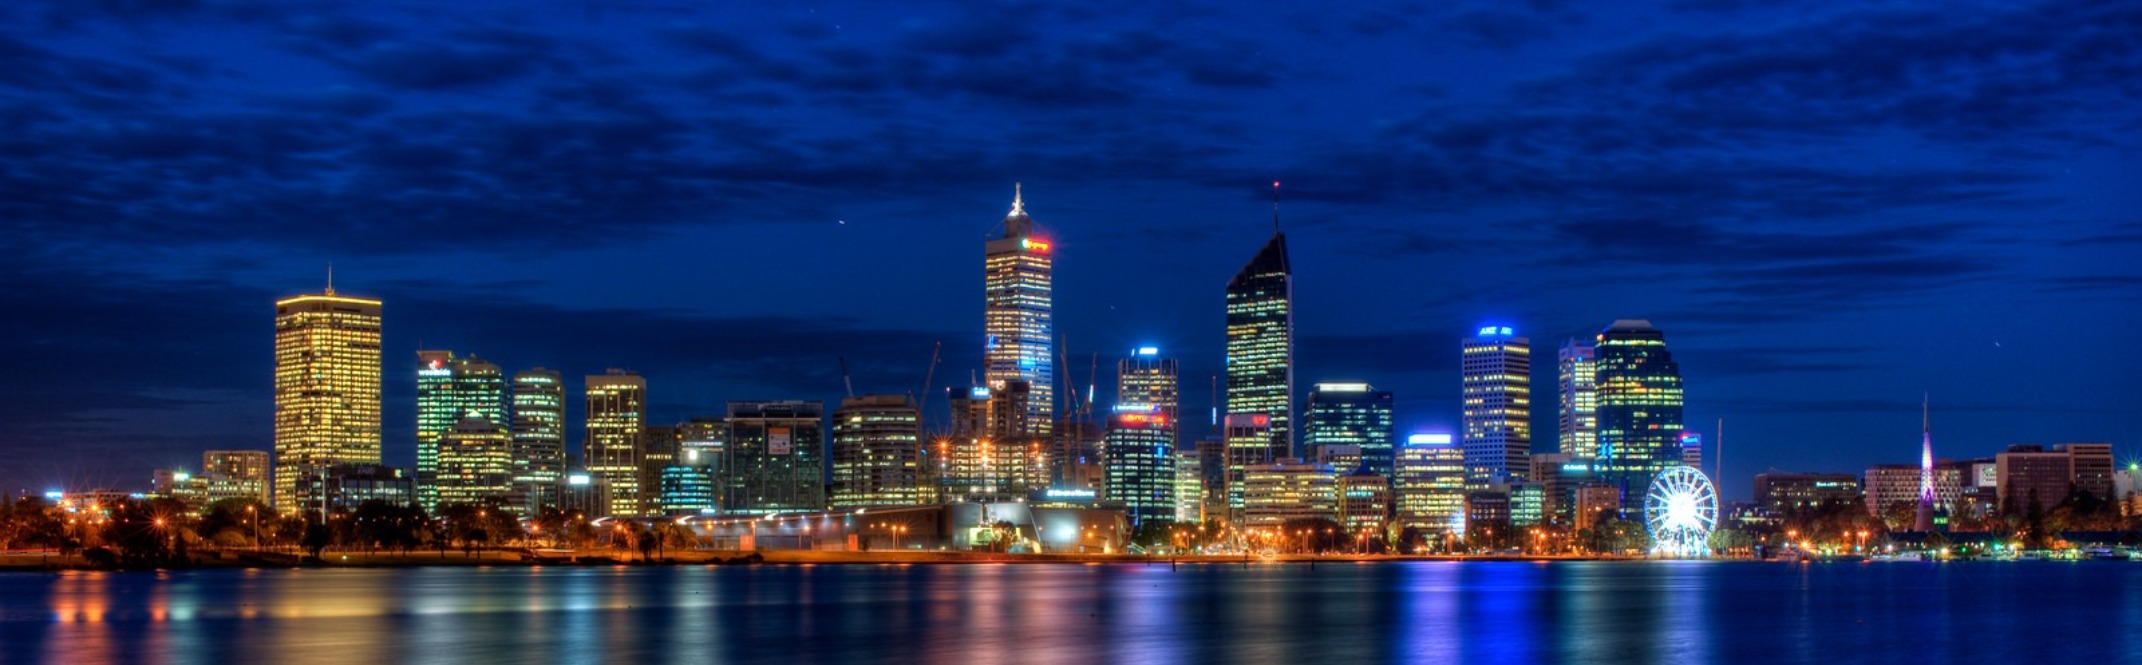 View of Perth Harbor at night time.